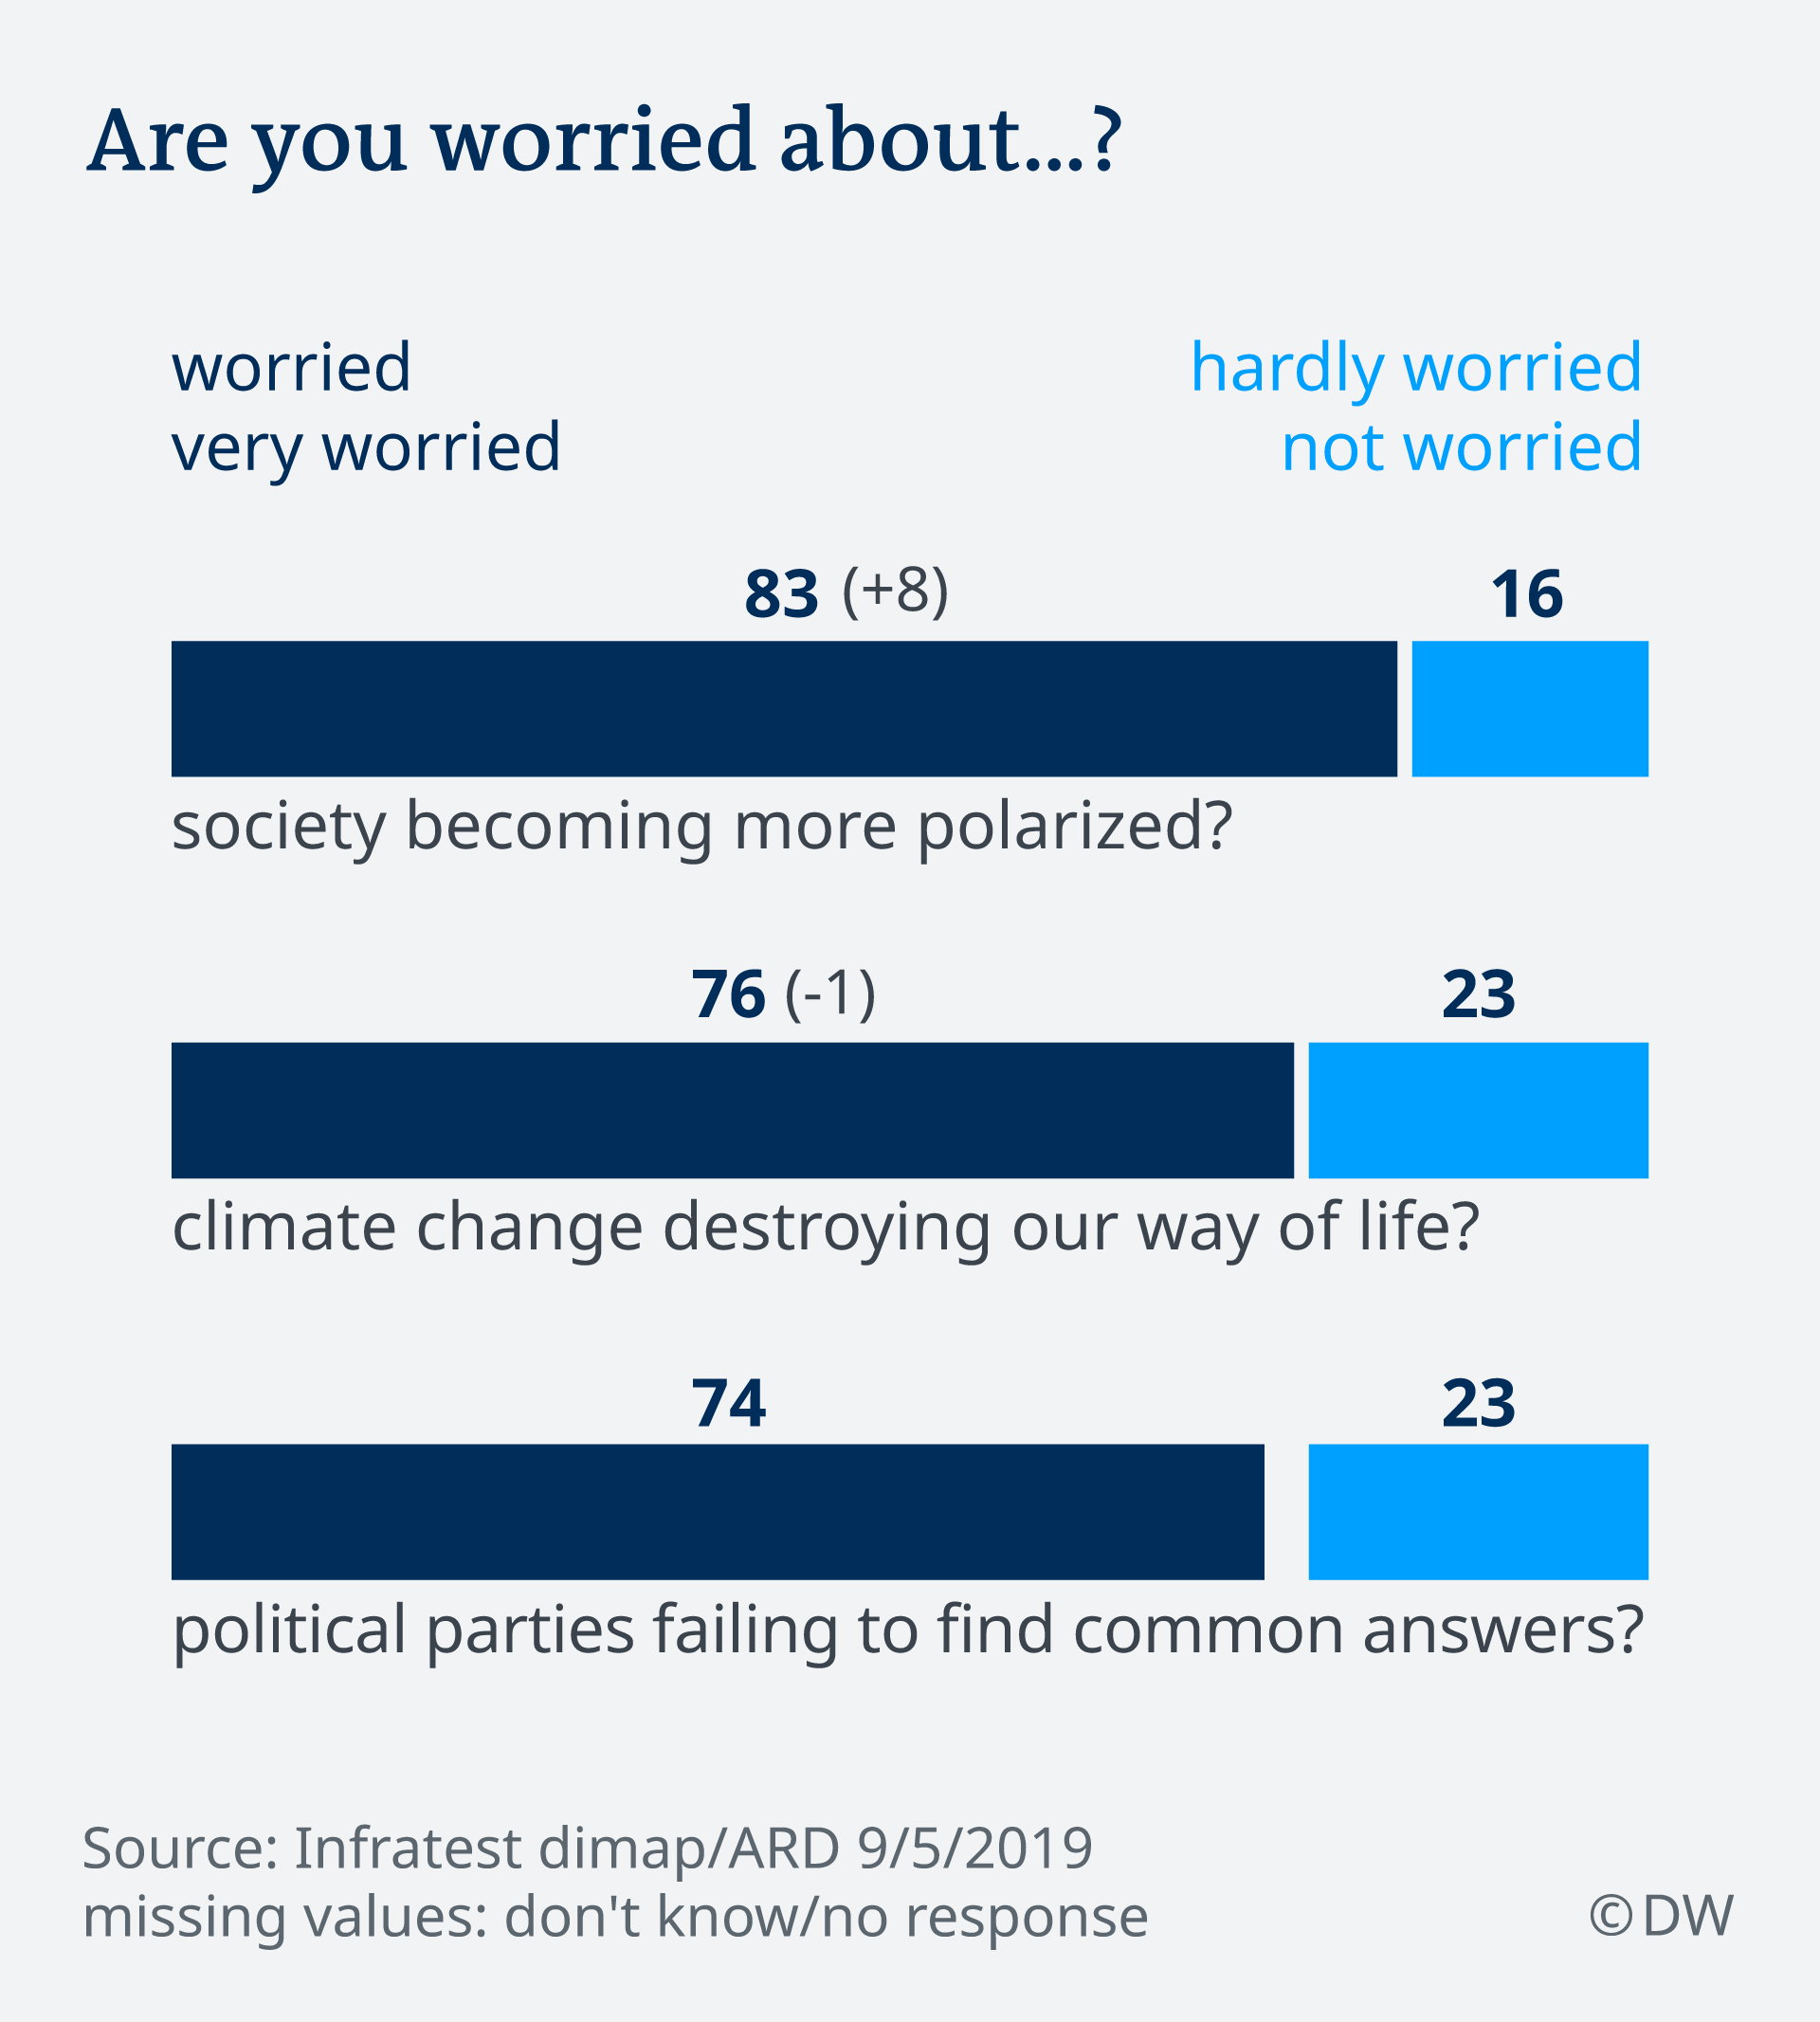 What worries Germans? Climate change, polarization, parties not agreeing.